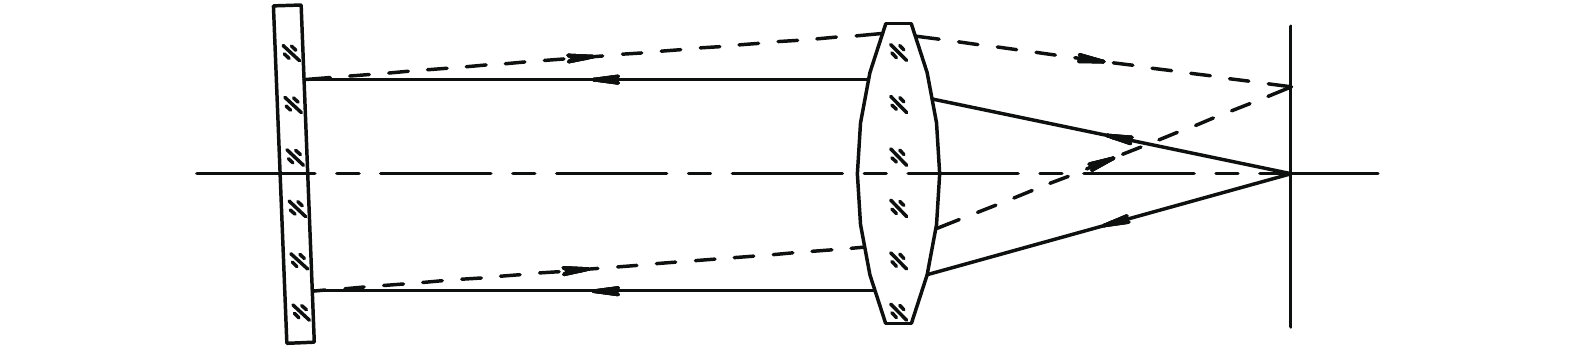 Schematic diagram of self-collimating